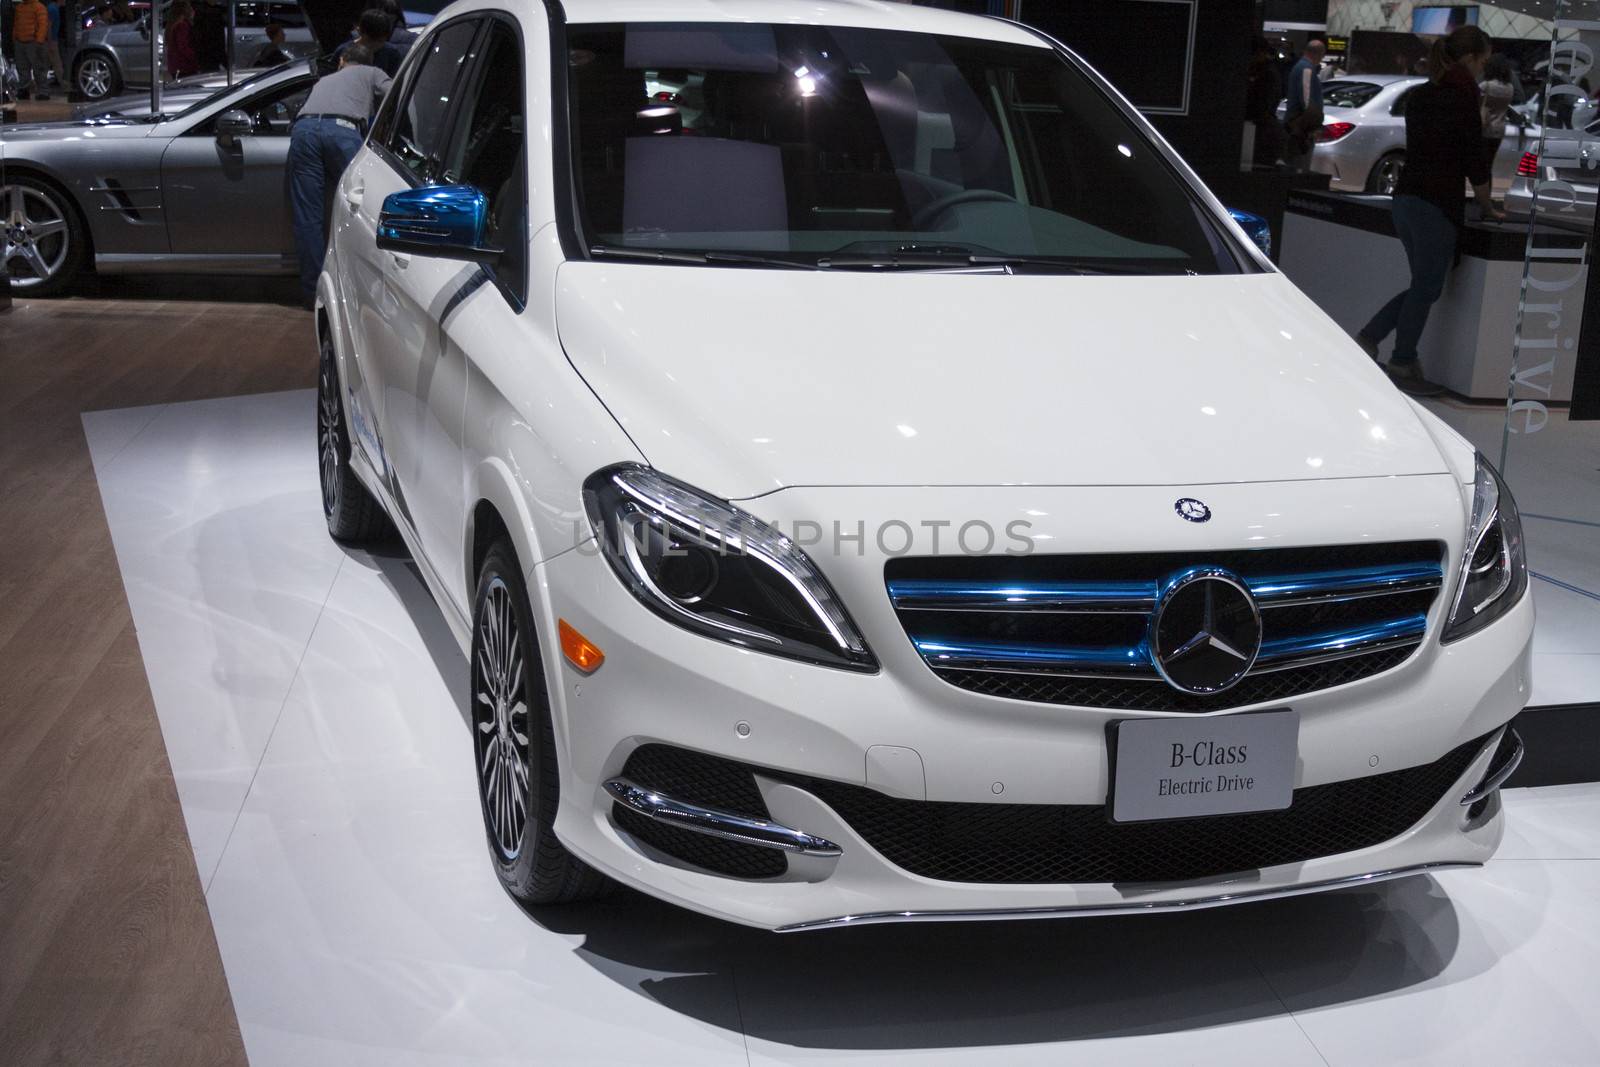 DETROIT - JANUARY 26 :The new 2014 Mercedes-Benz B-Class Electri by snokid